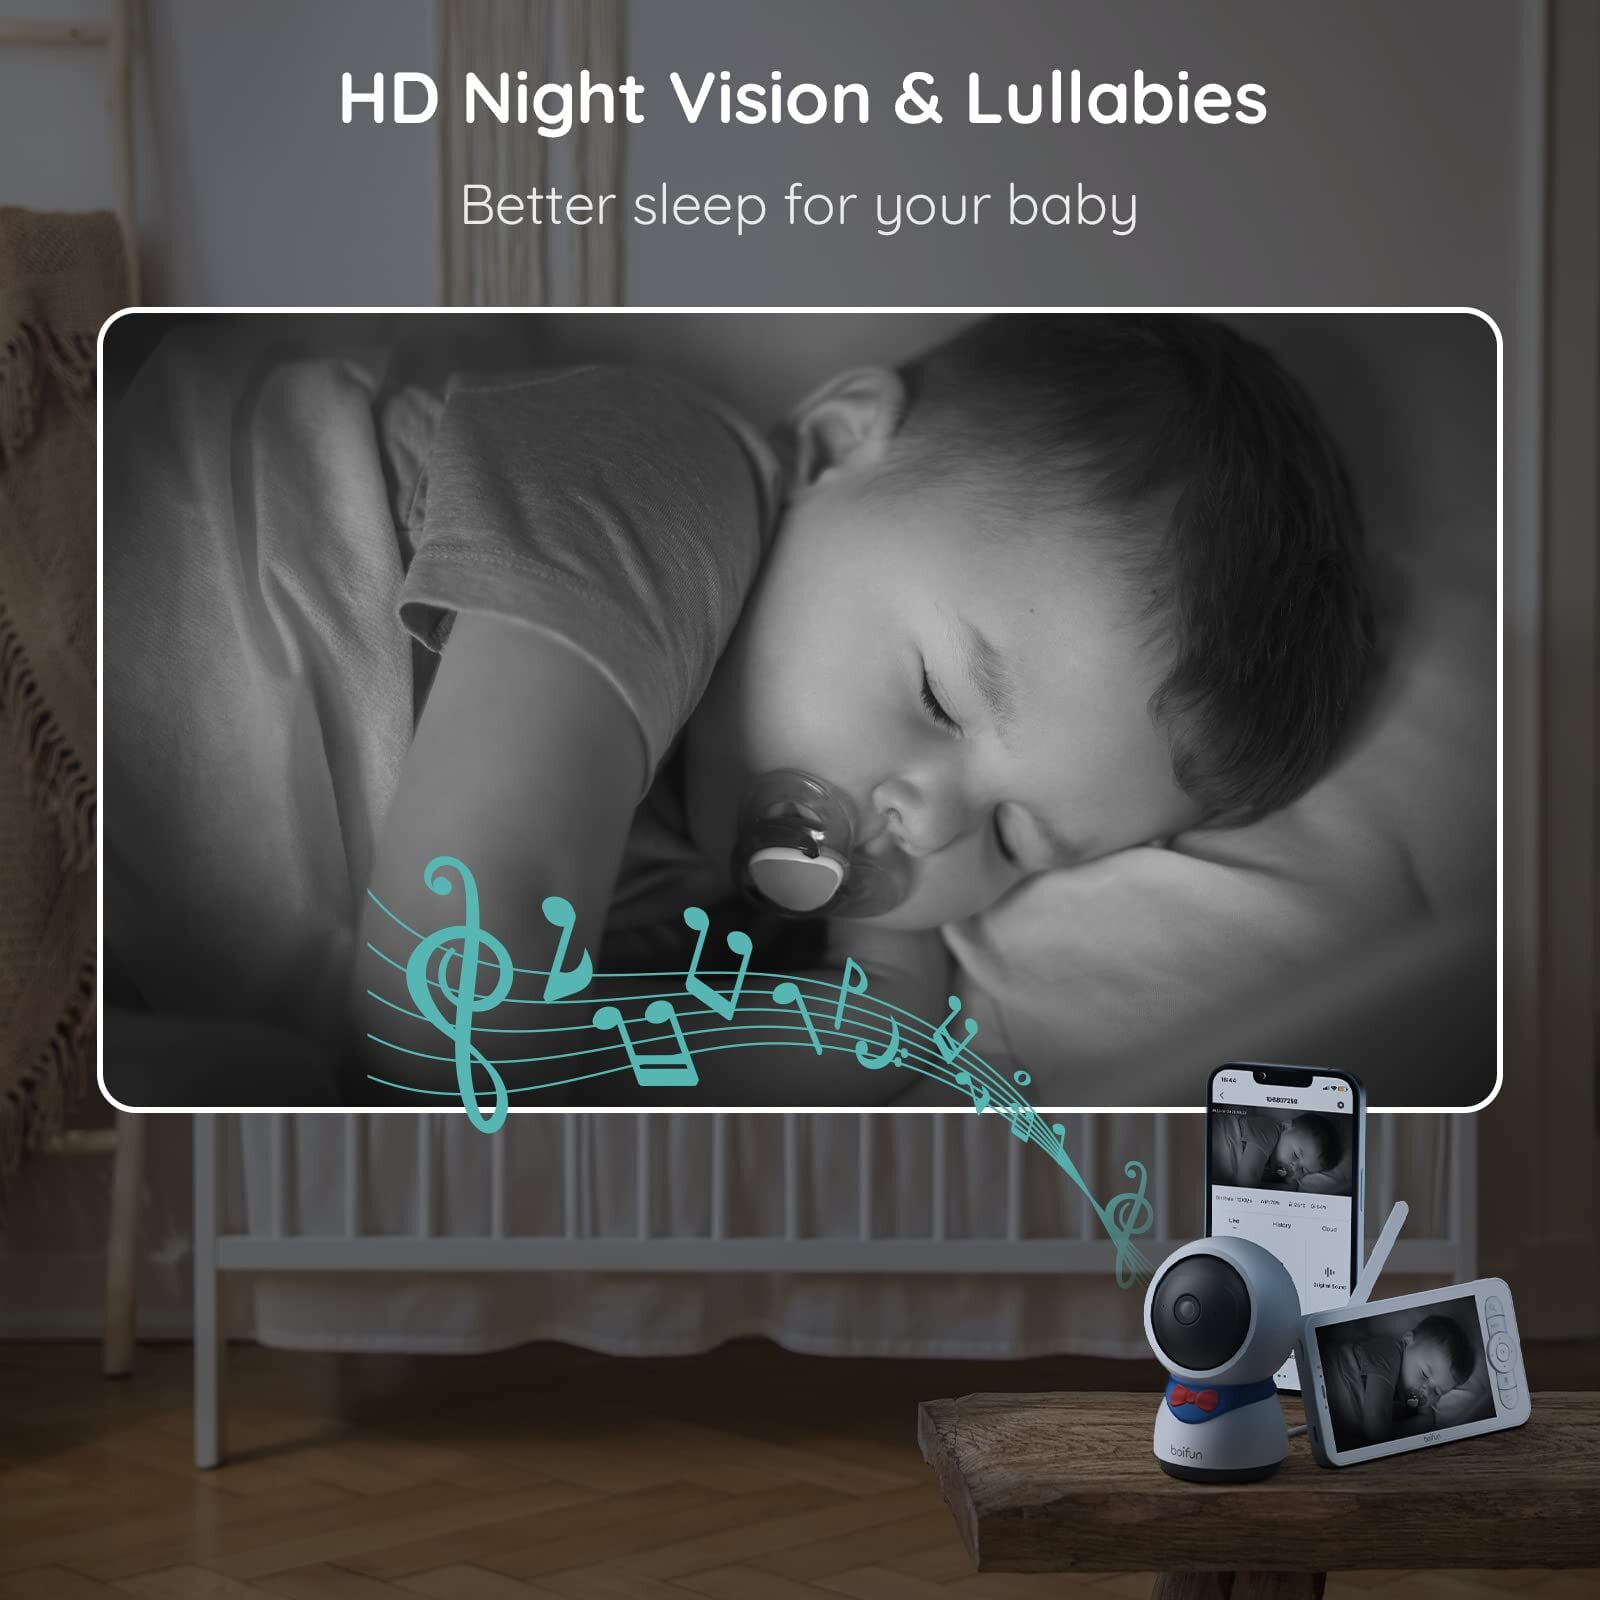 BOIFUN Smart Wifi Video Baby Monitor 5 Inch with Camera 1080P PTZ 355°,  Motion and Noise Detection Supports Mobile App Control in Pakistan for Rs.  25999.00